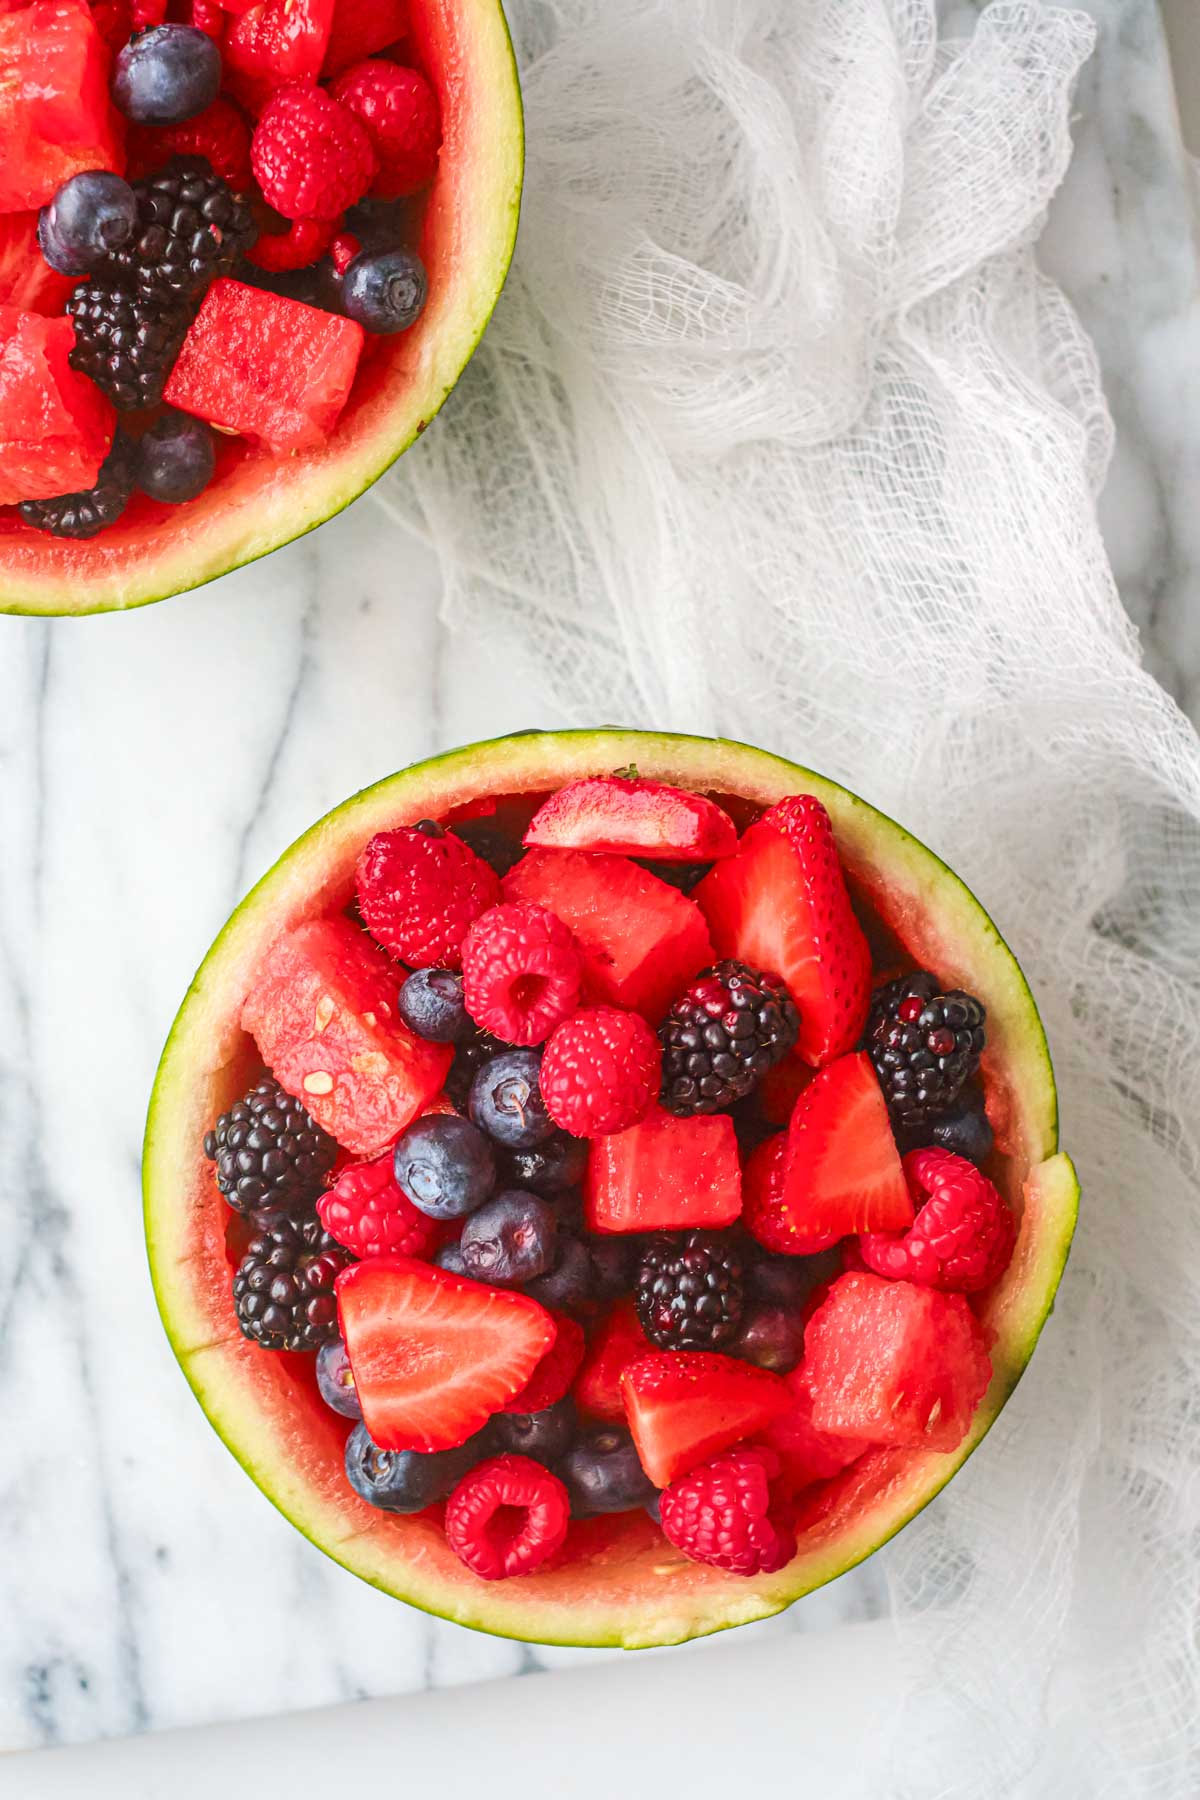 the finished watermelon fruit bowl filled with fresh berries